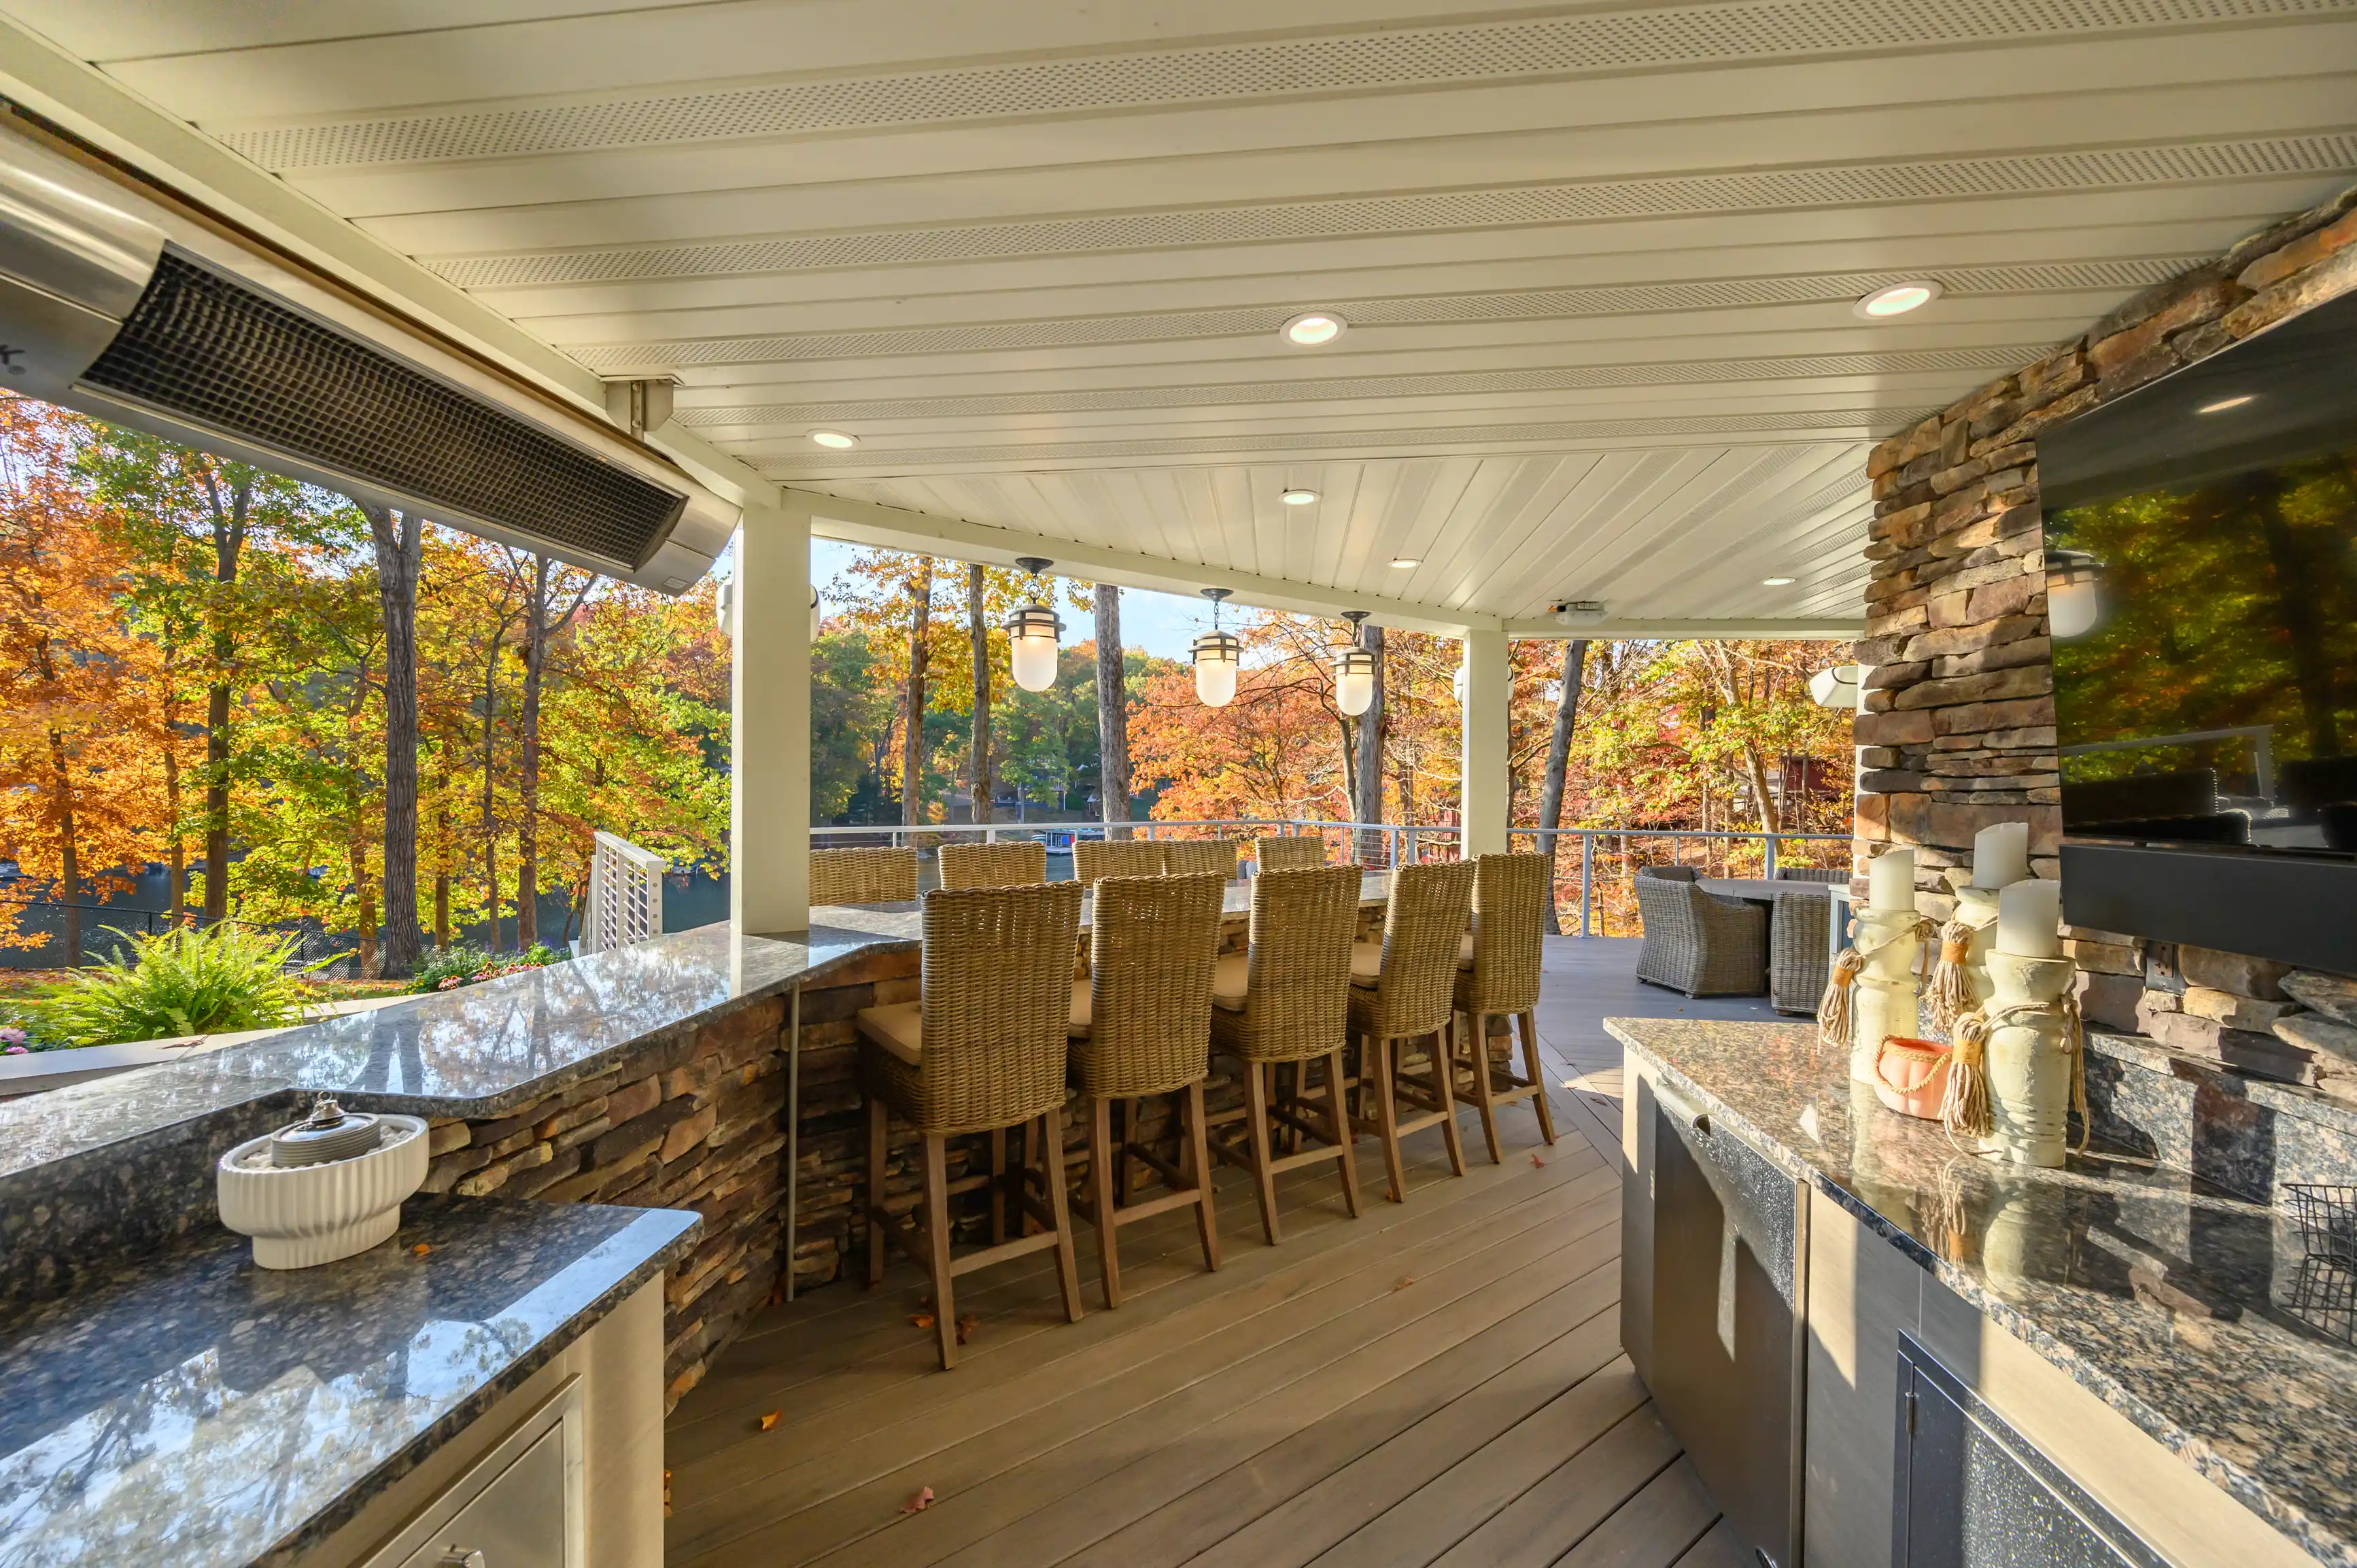 Elegant outdoor covered patio area with wicker bar stools, a stone fireplace, and a view of autumn trees.